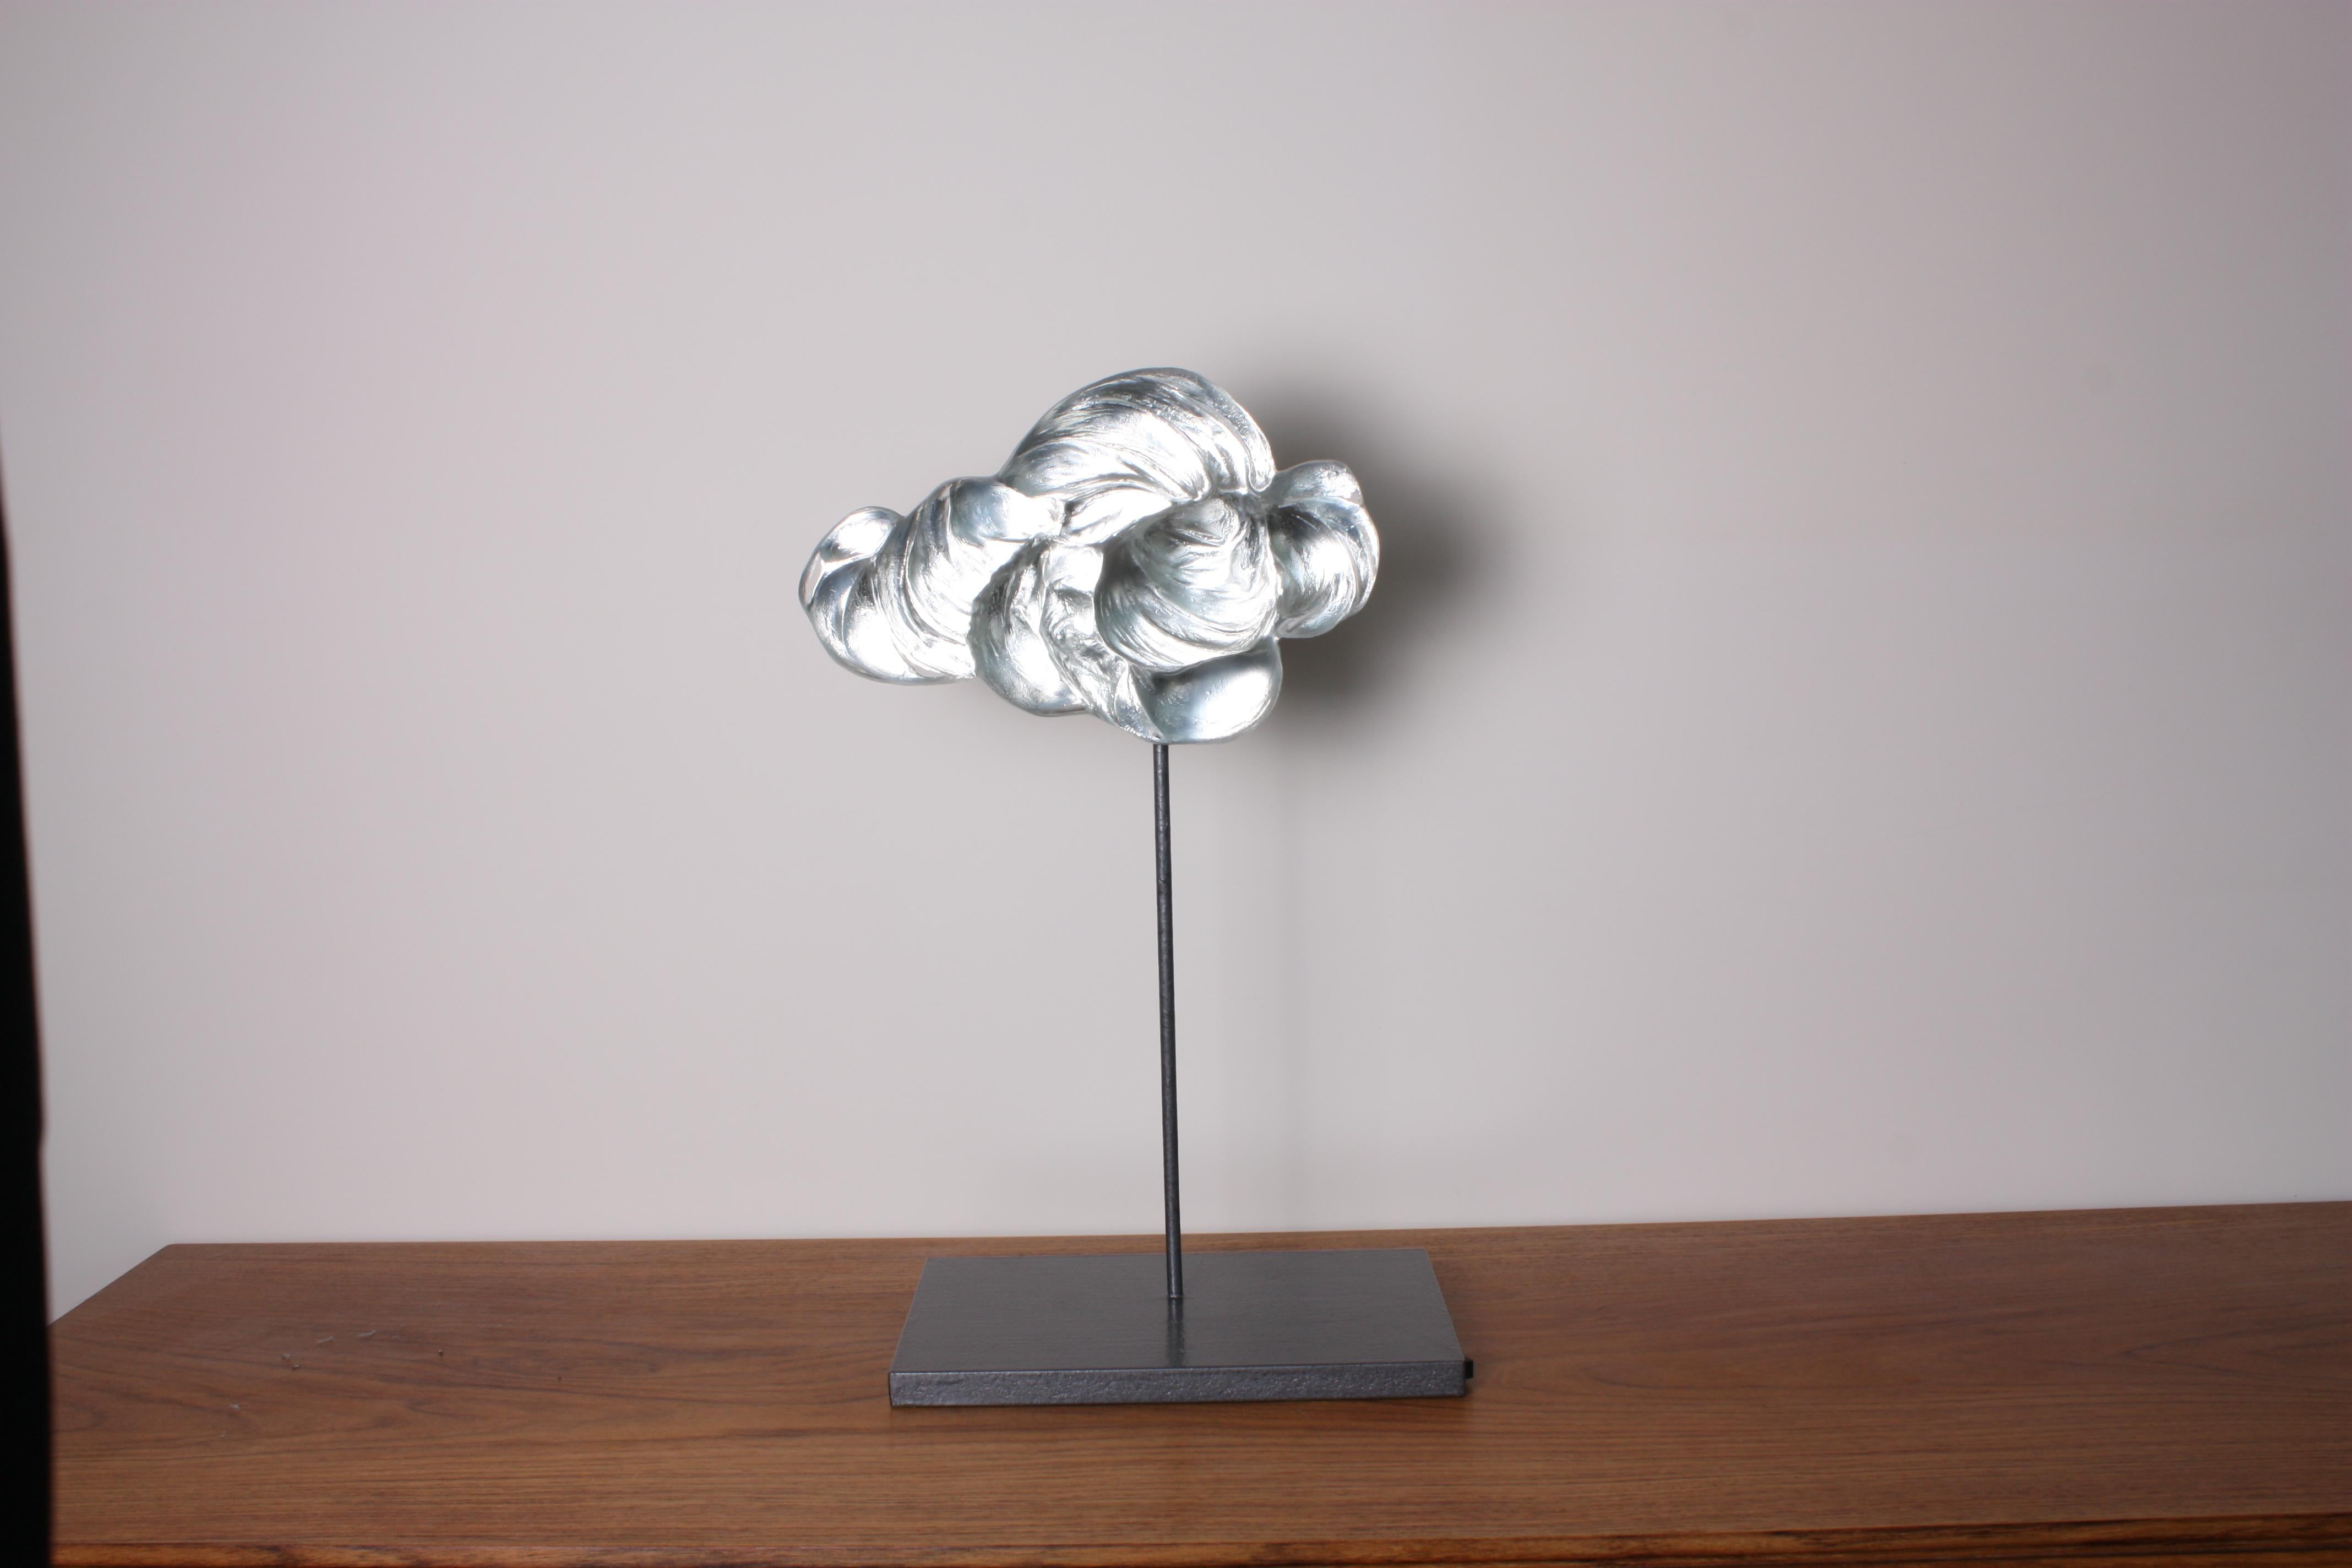 Contemporary glass sculpture representing a billowing cloud made using the pâte de verre technique, on a metal and wood pedestal. The artist casts melted glass in carefully hand-sculpted molds. Different thicknesses of glass create depth and